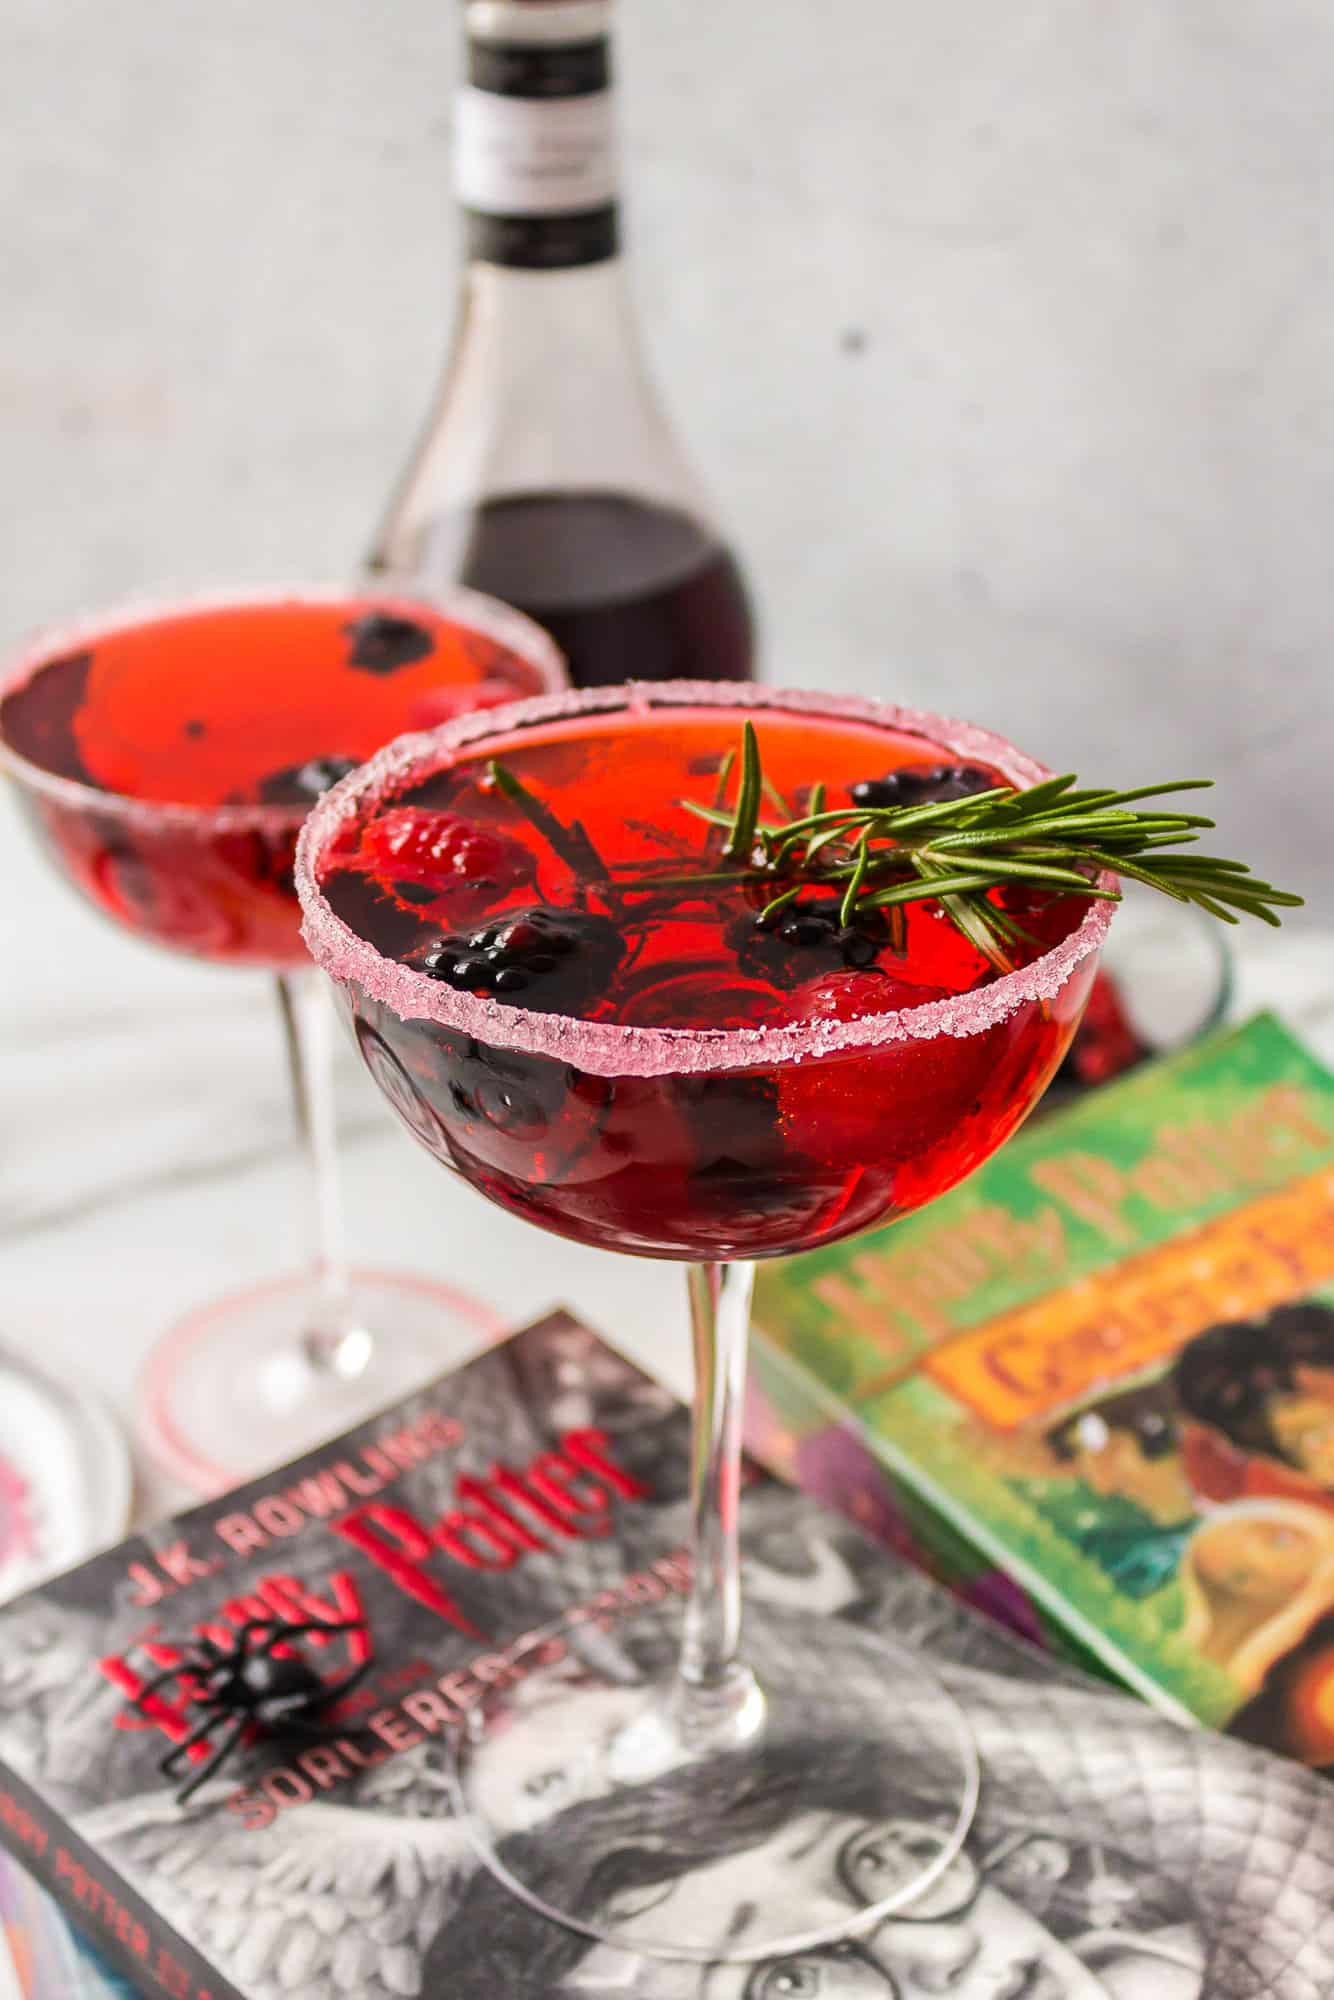 Two bright red cocktails with fruit and rosemary garnishes.